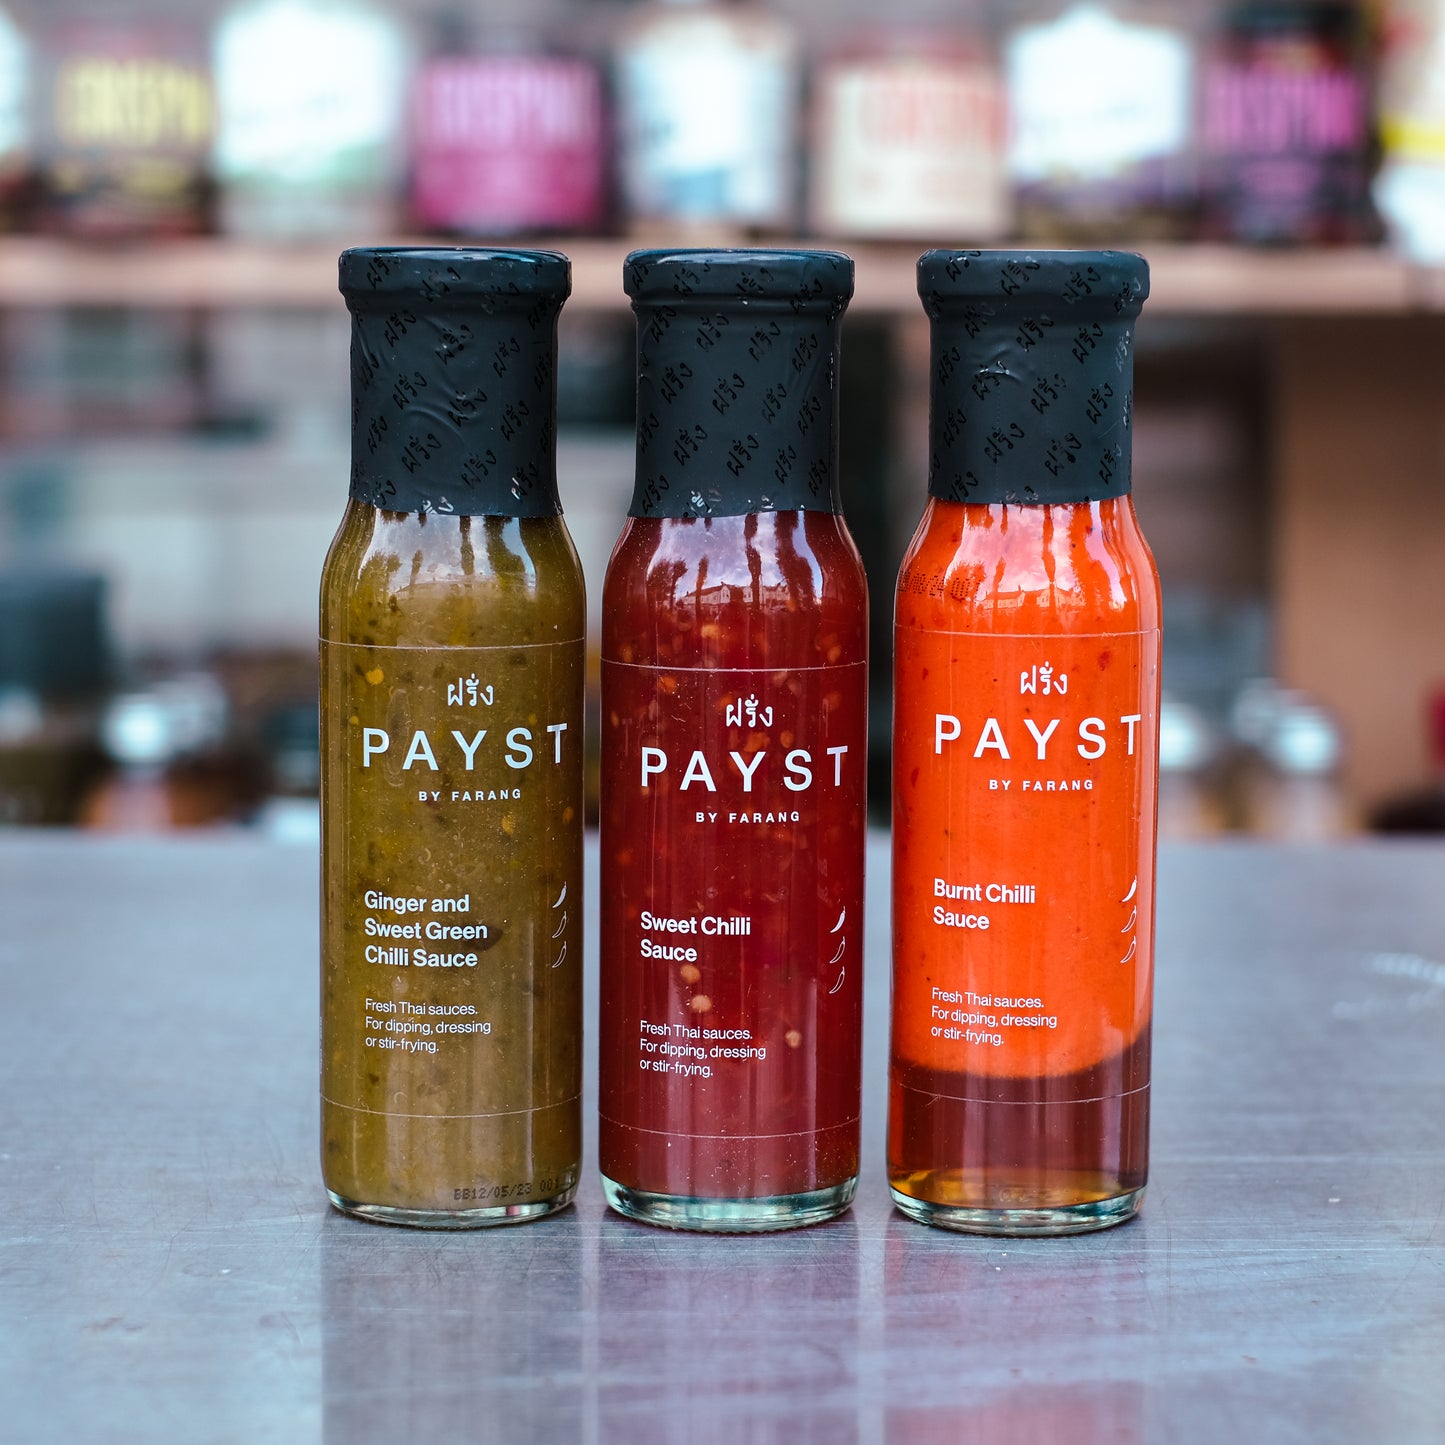 Thai Chilli Sauces by PAYST / Farang